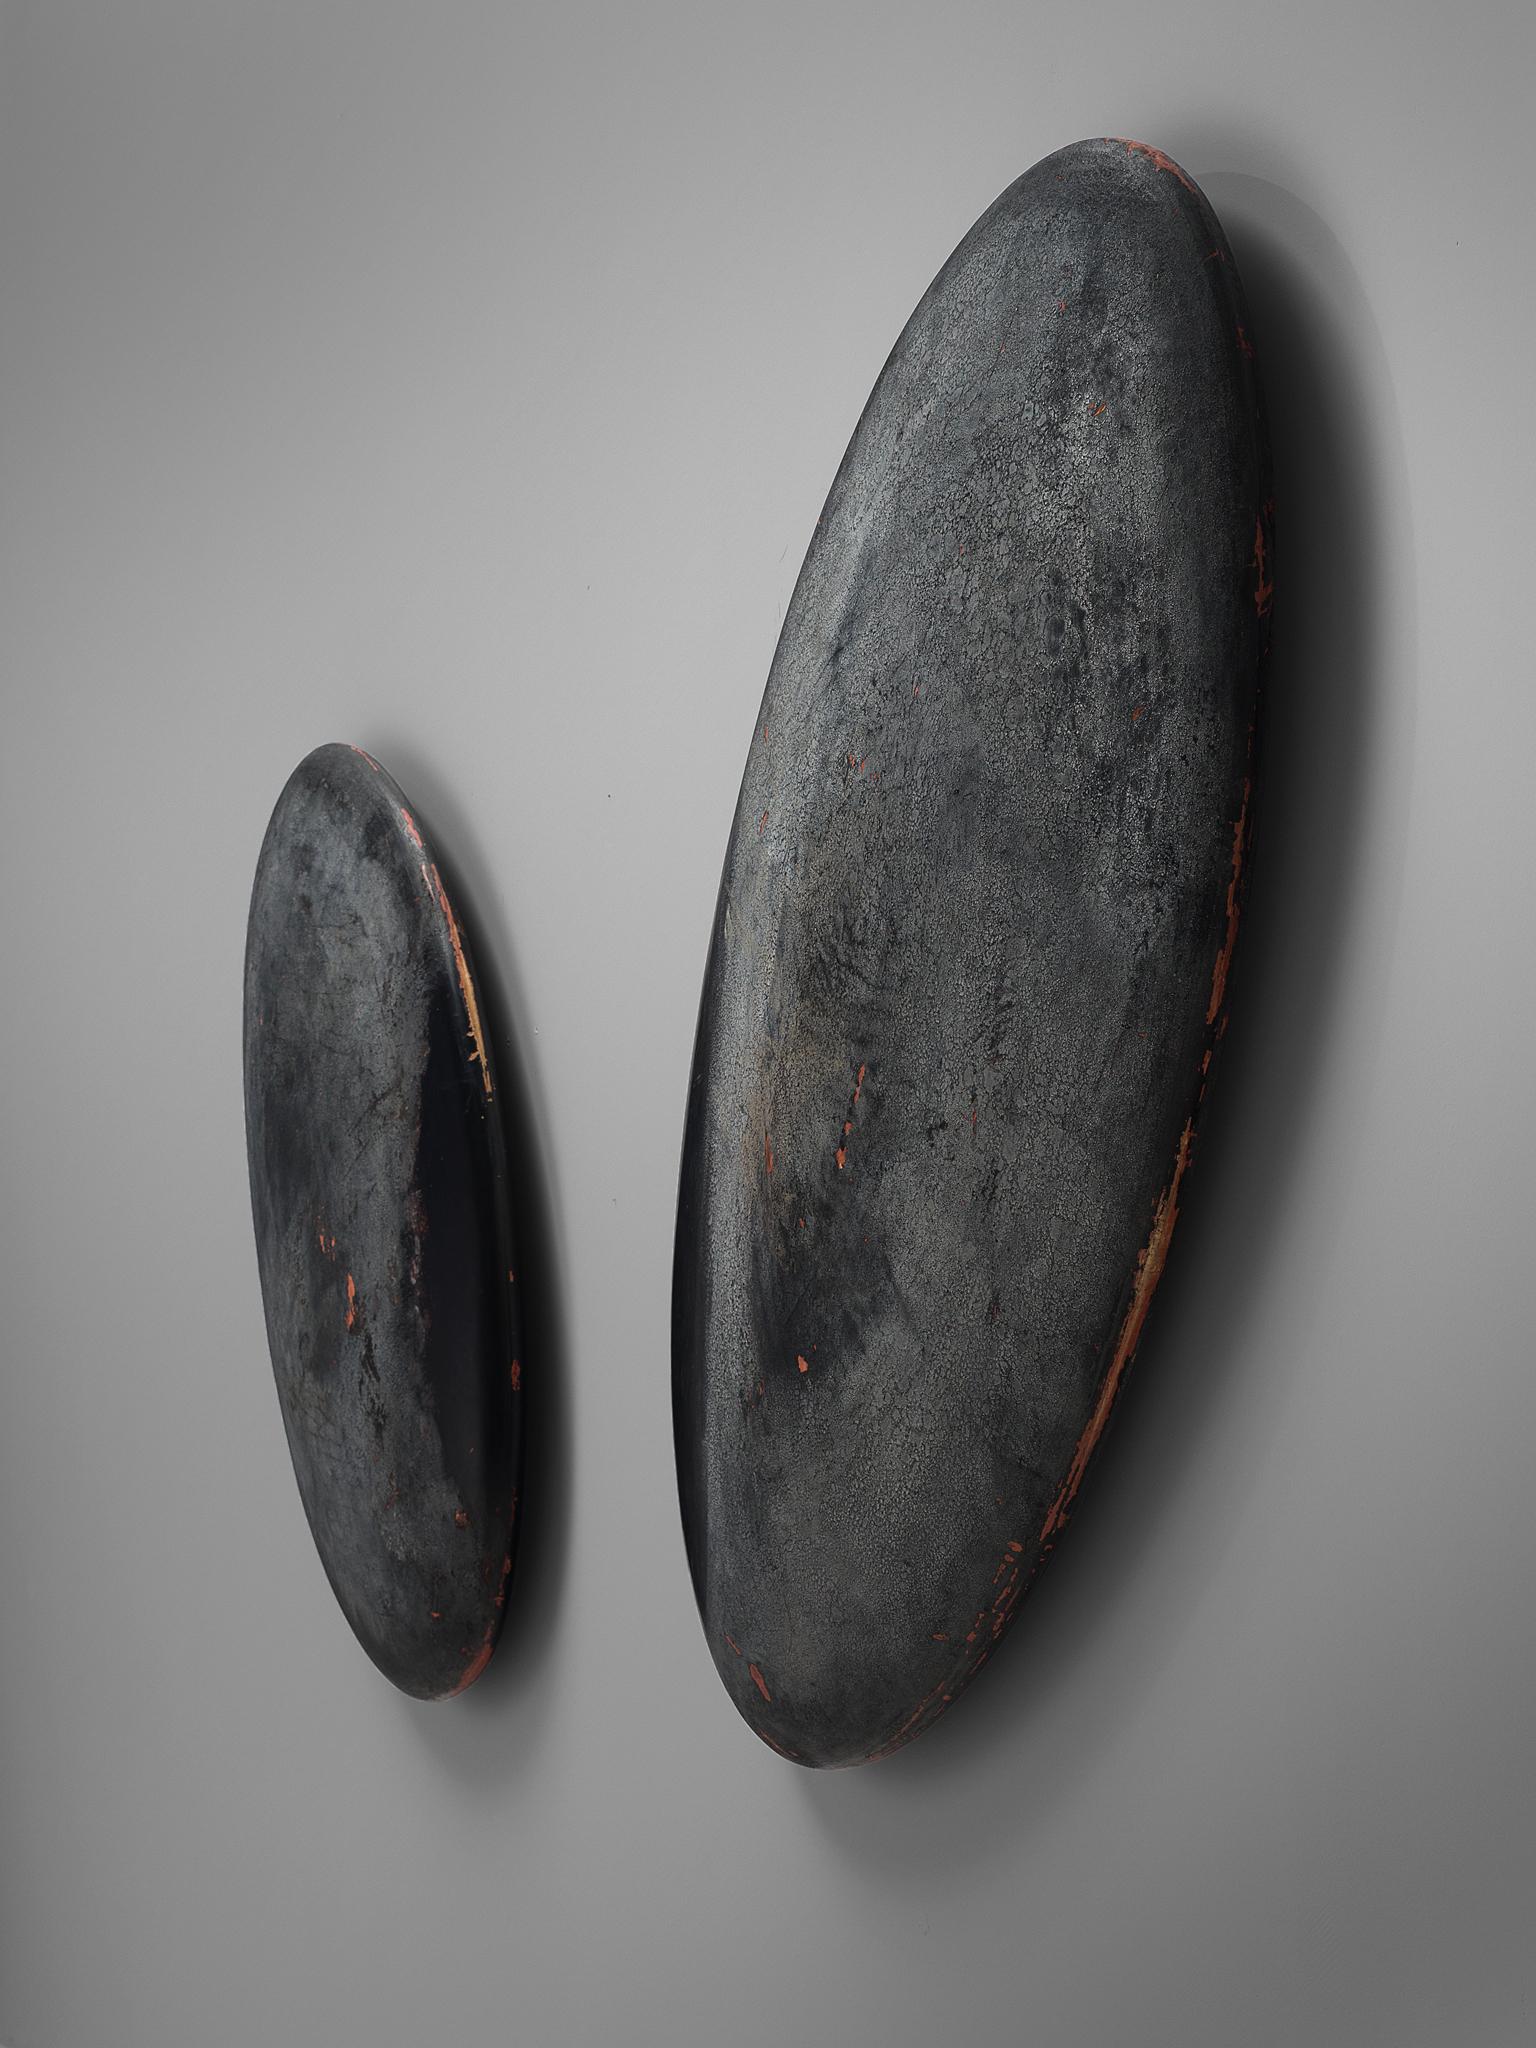 Modern Pair of Large Oval Minimalist Wall Sculptures in Solid Wood